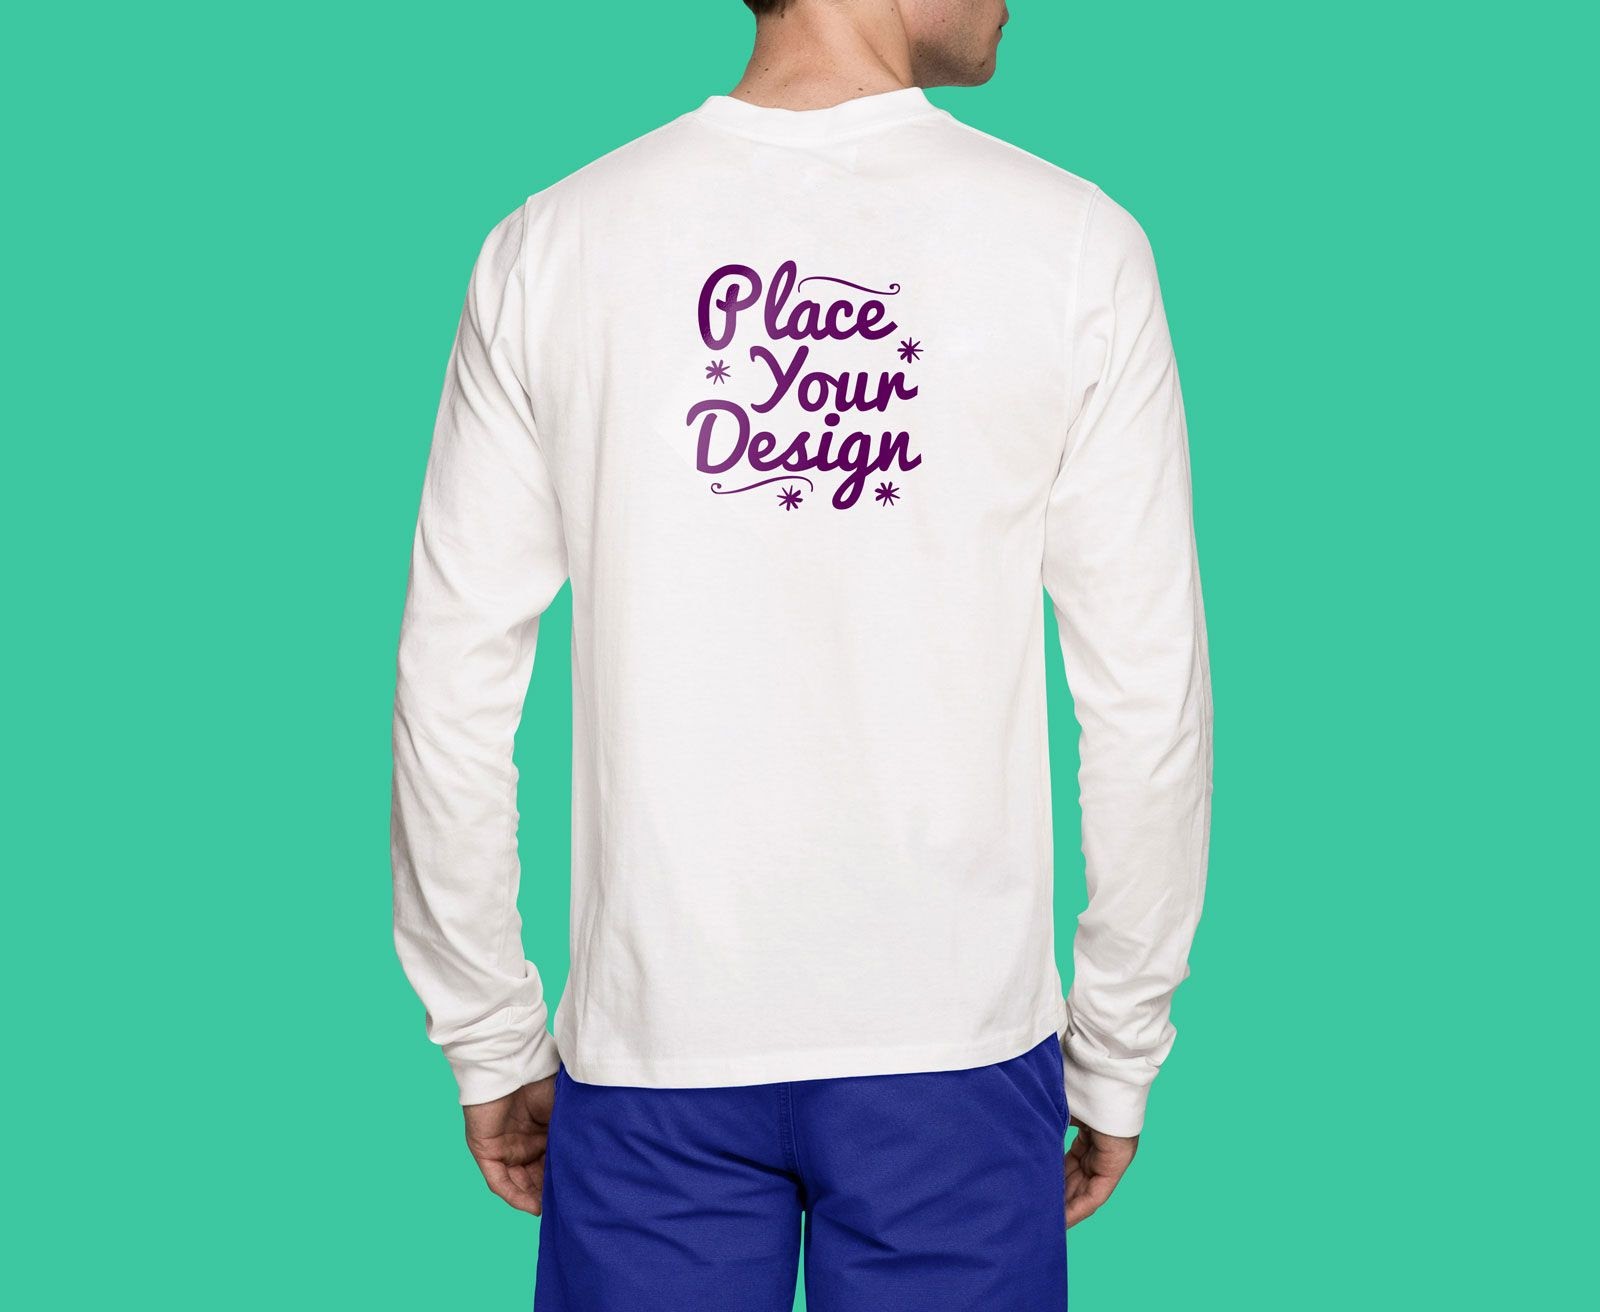 Download 7915+ Long Sleeve T-Shirt Mockup Front And Back Psd Free Yellow Images Object Mockups